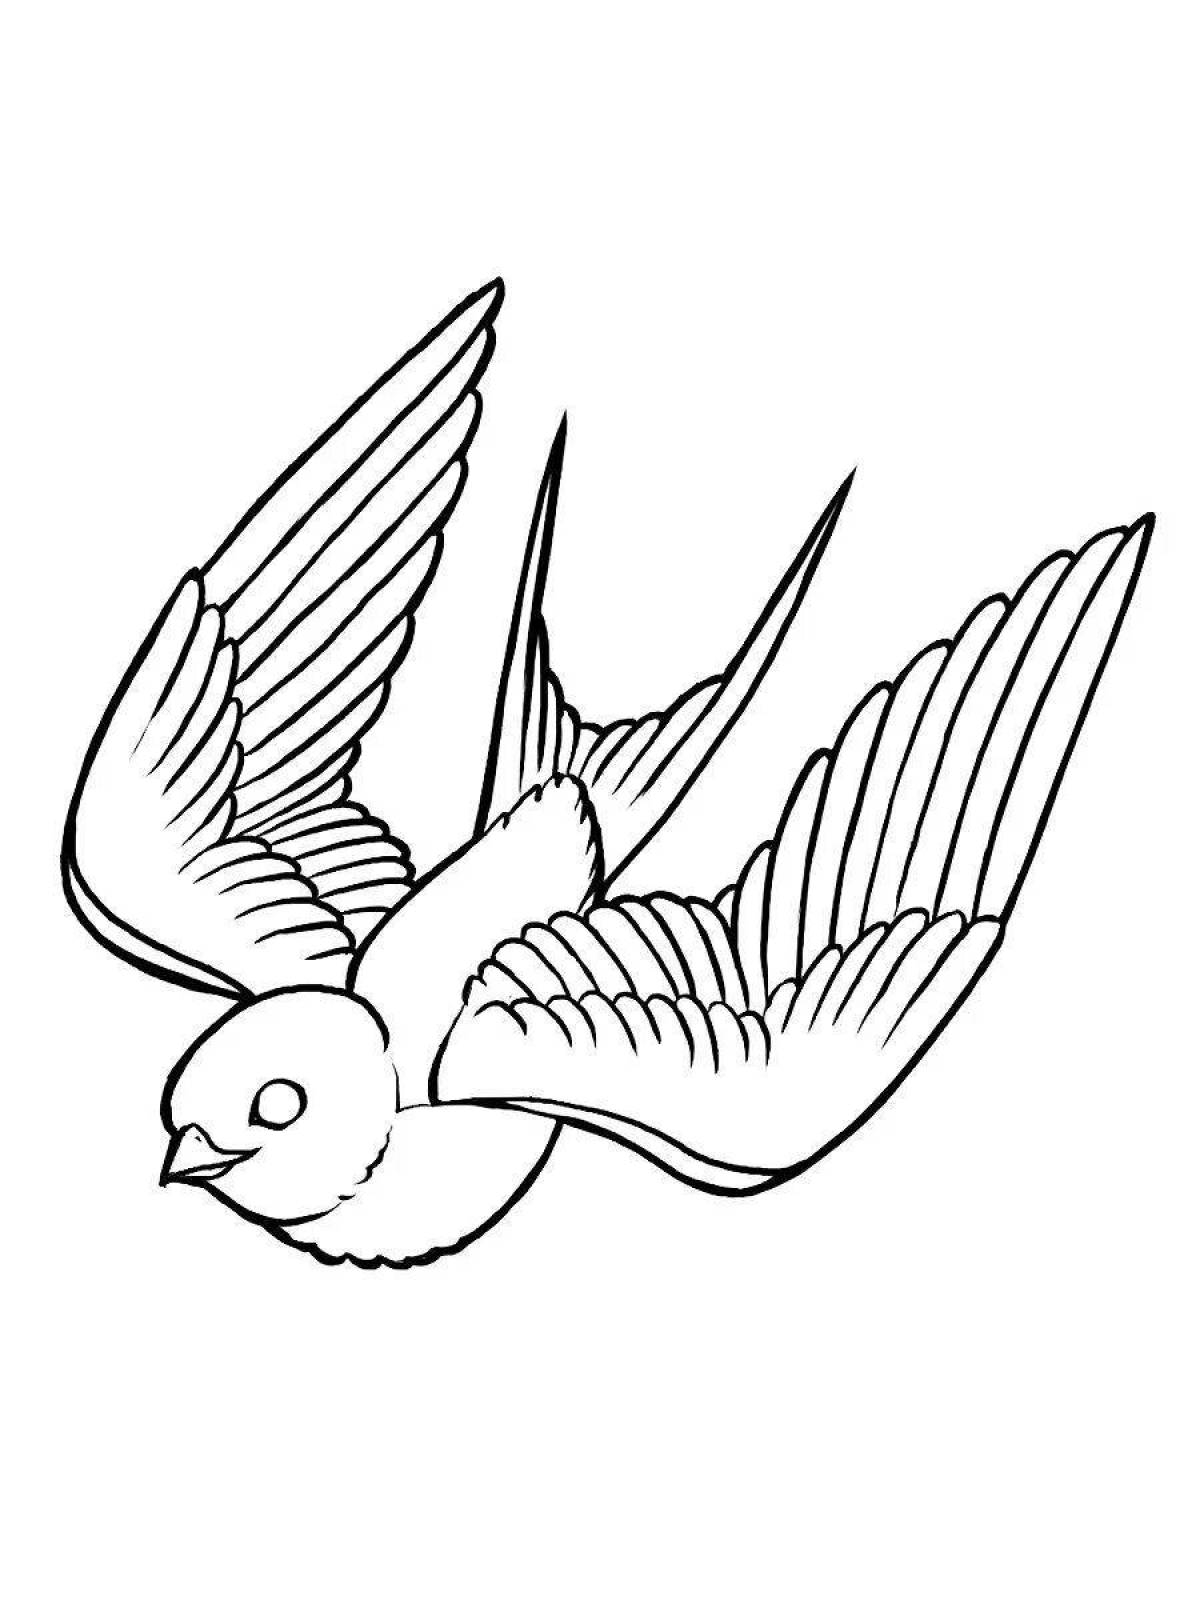 Exquisite flying birds coloring page